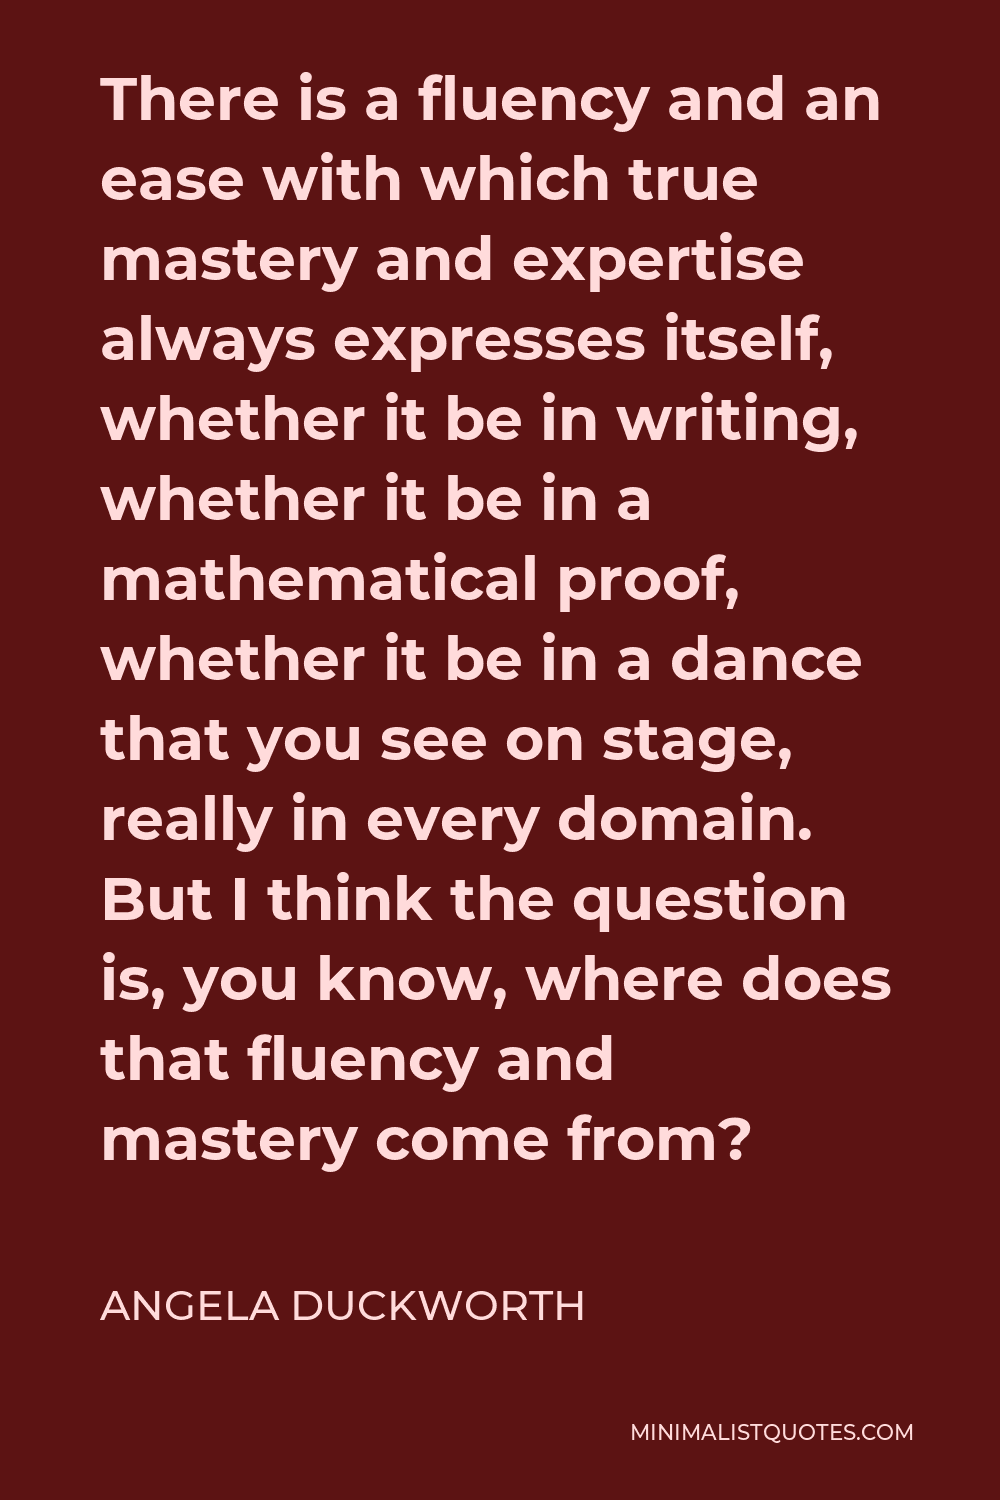 Angela Duckworth Quote - There is a fluency and an ease with which true mastery and expertise always expresses itself, whether it be in writing, whether it be in a mathematical proof, whether it be in a dance that you see on stage, really in every domain. But I think the question is, you know, where does that fluency and mastery come from?